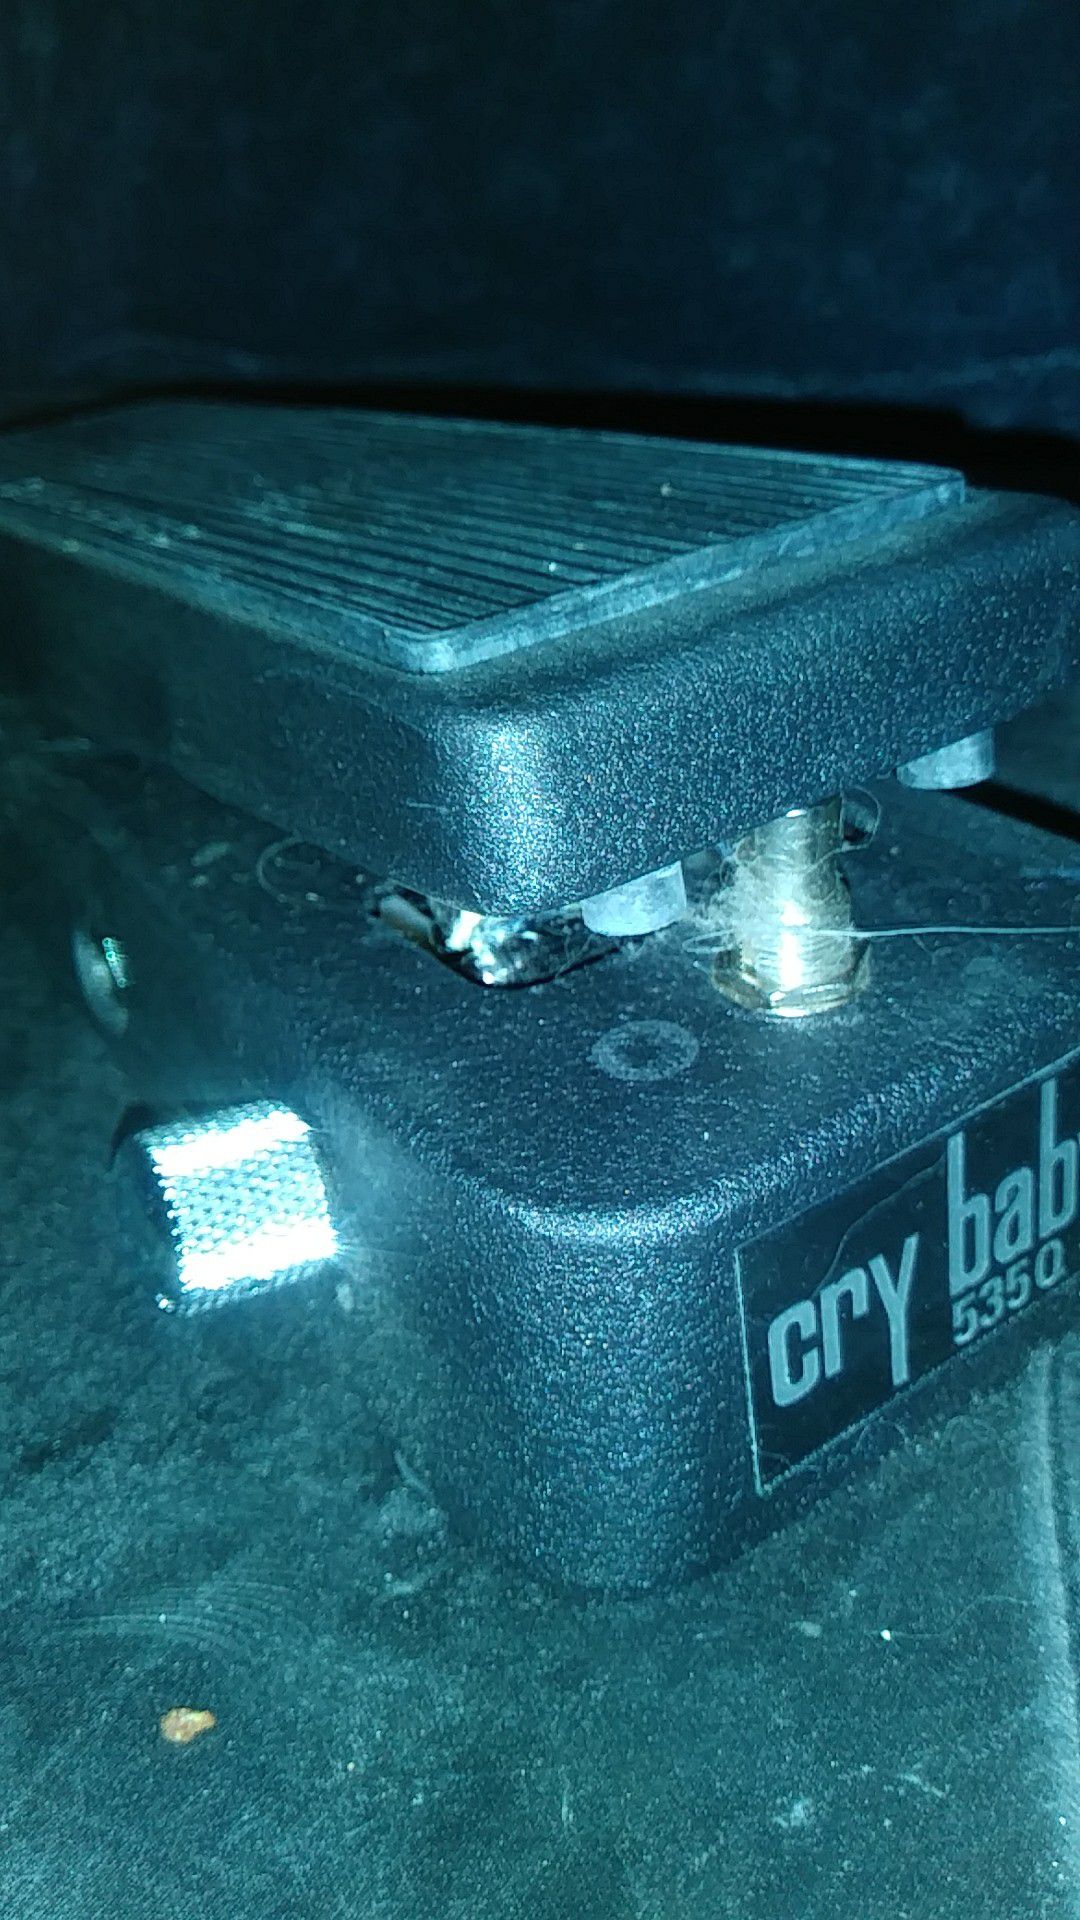 Dunlop Cry Baby 535Q Way Pedal